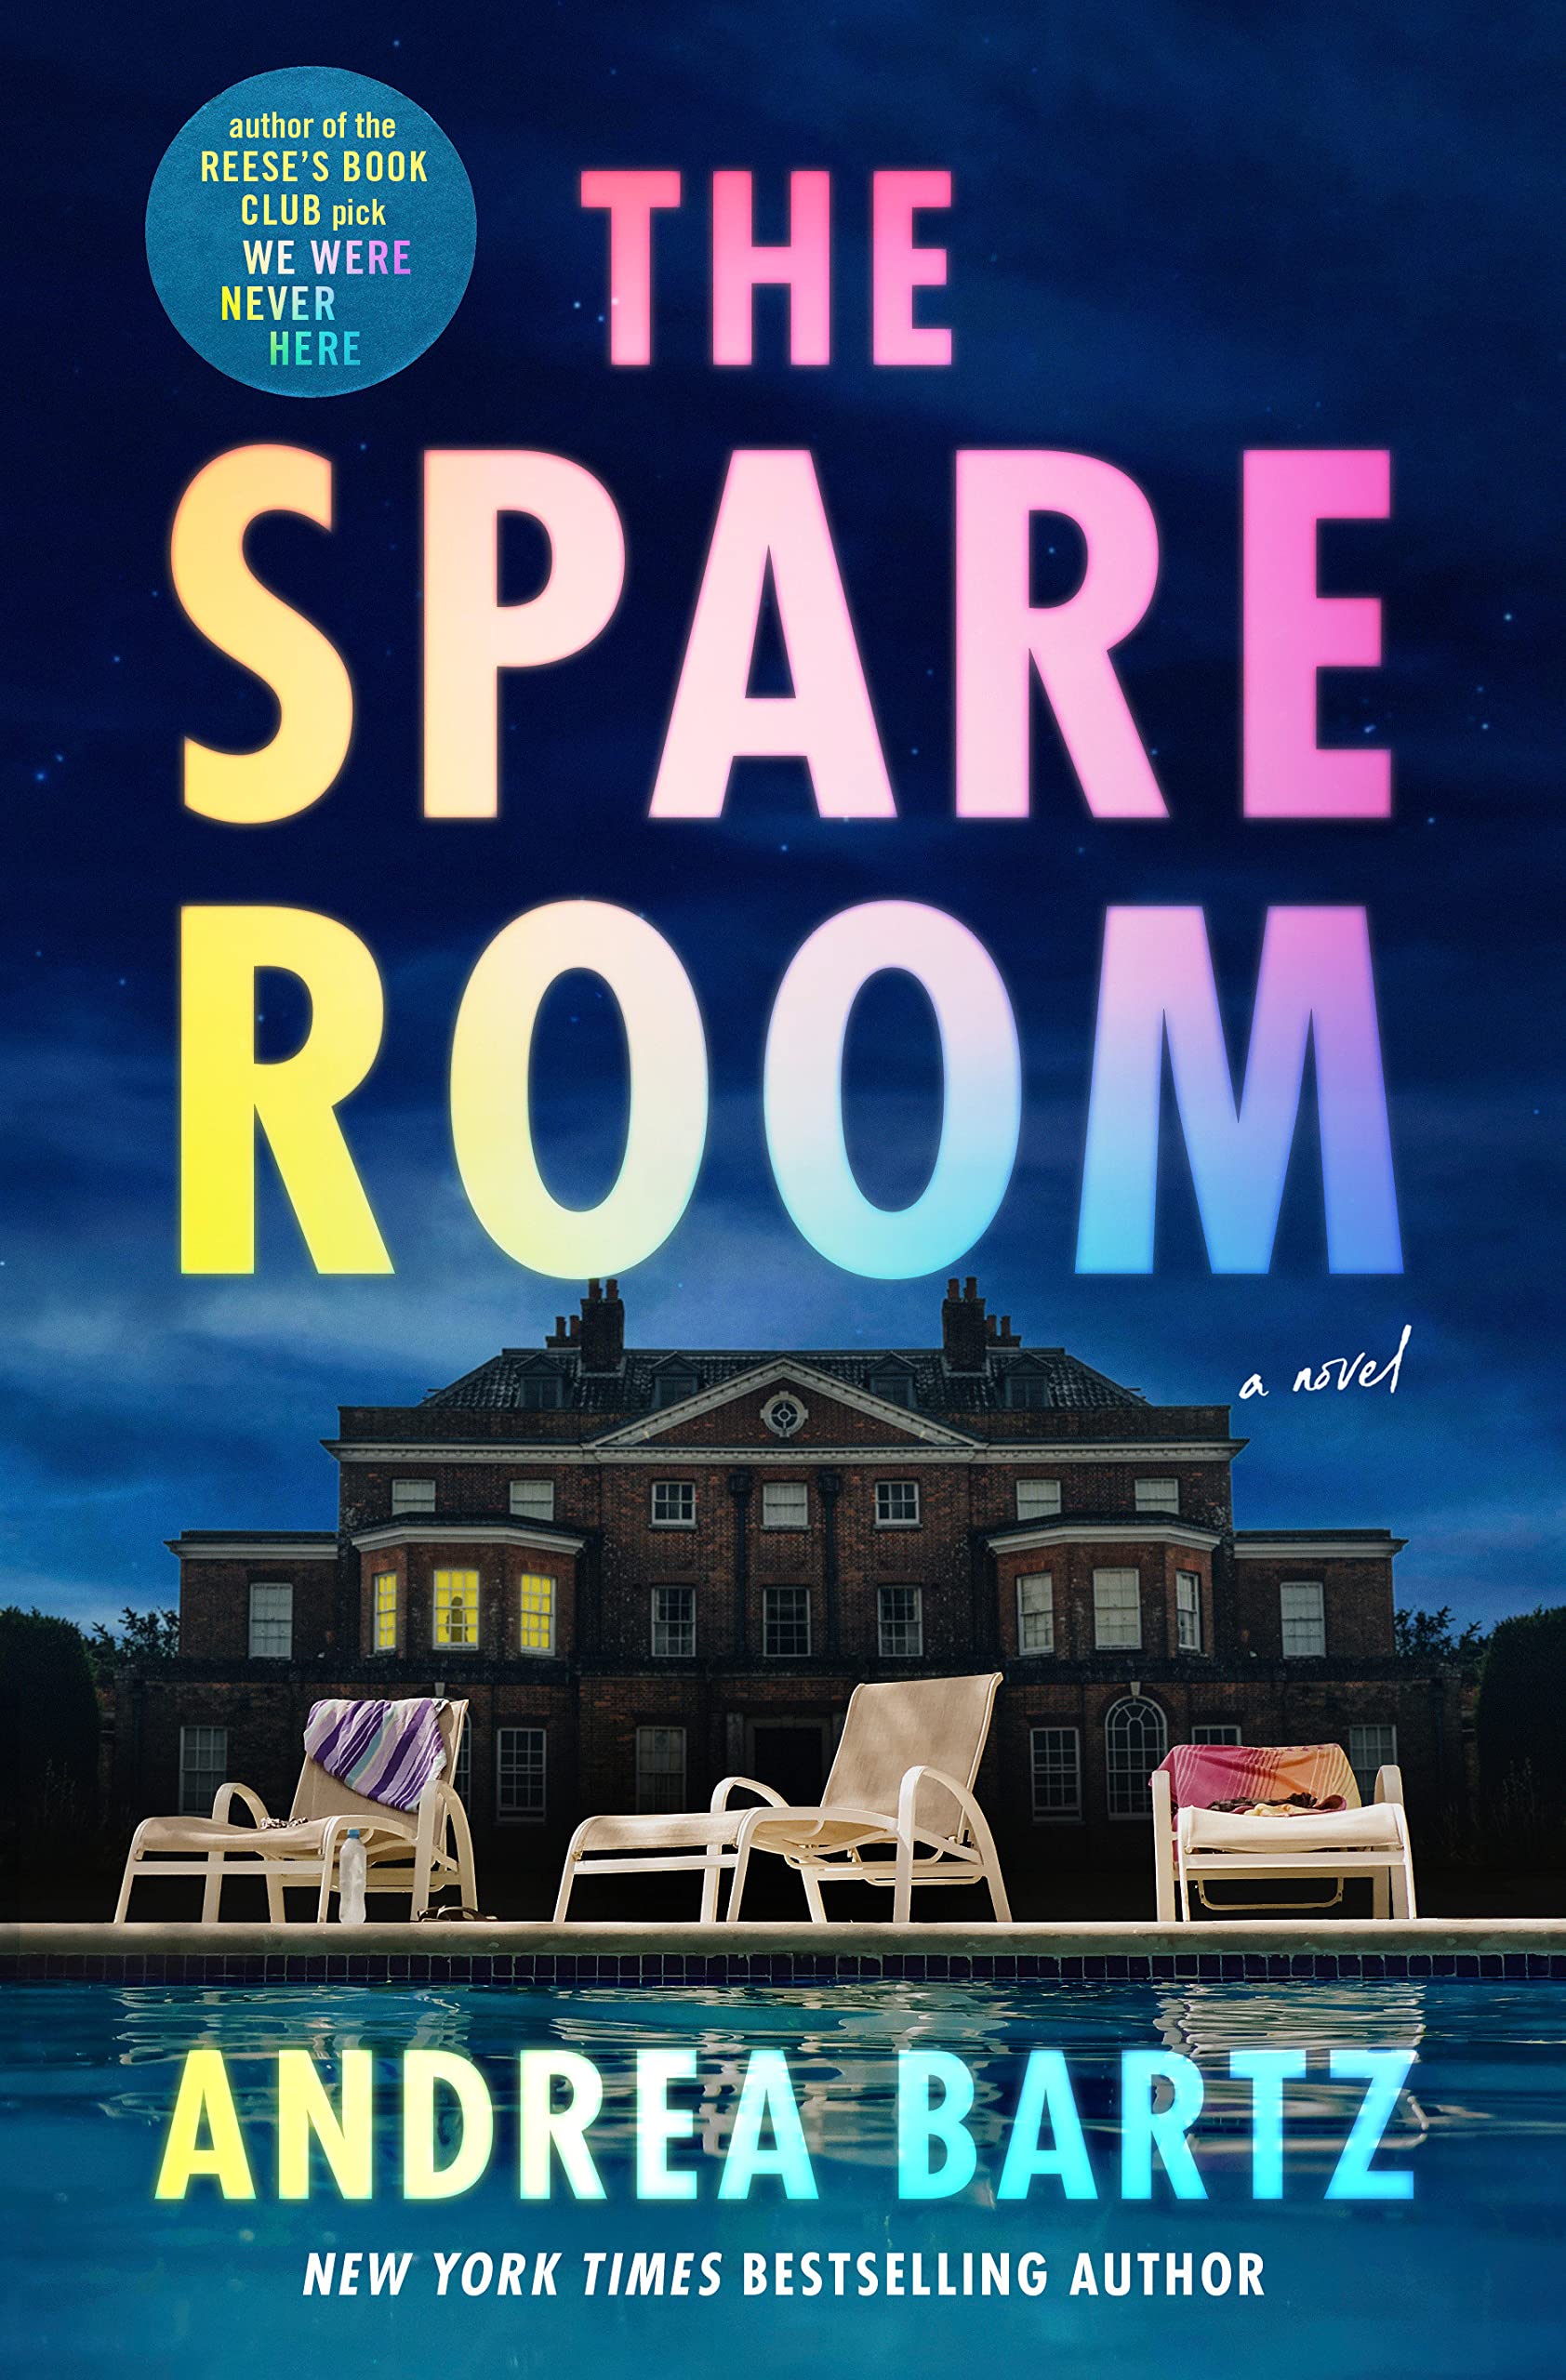 Image for "The Spare Room"